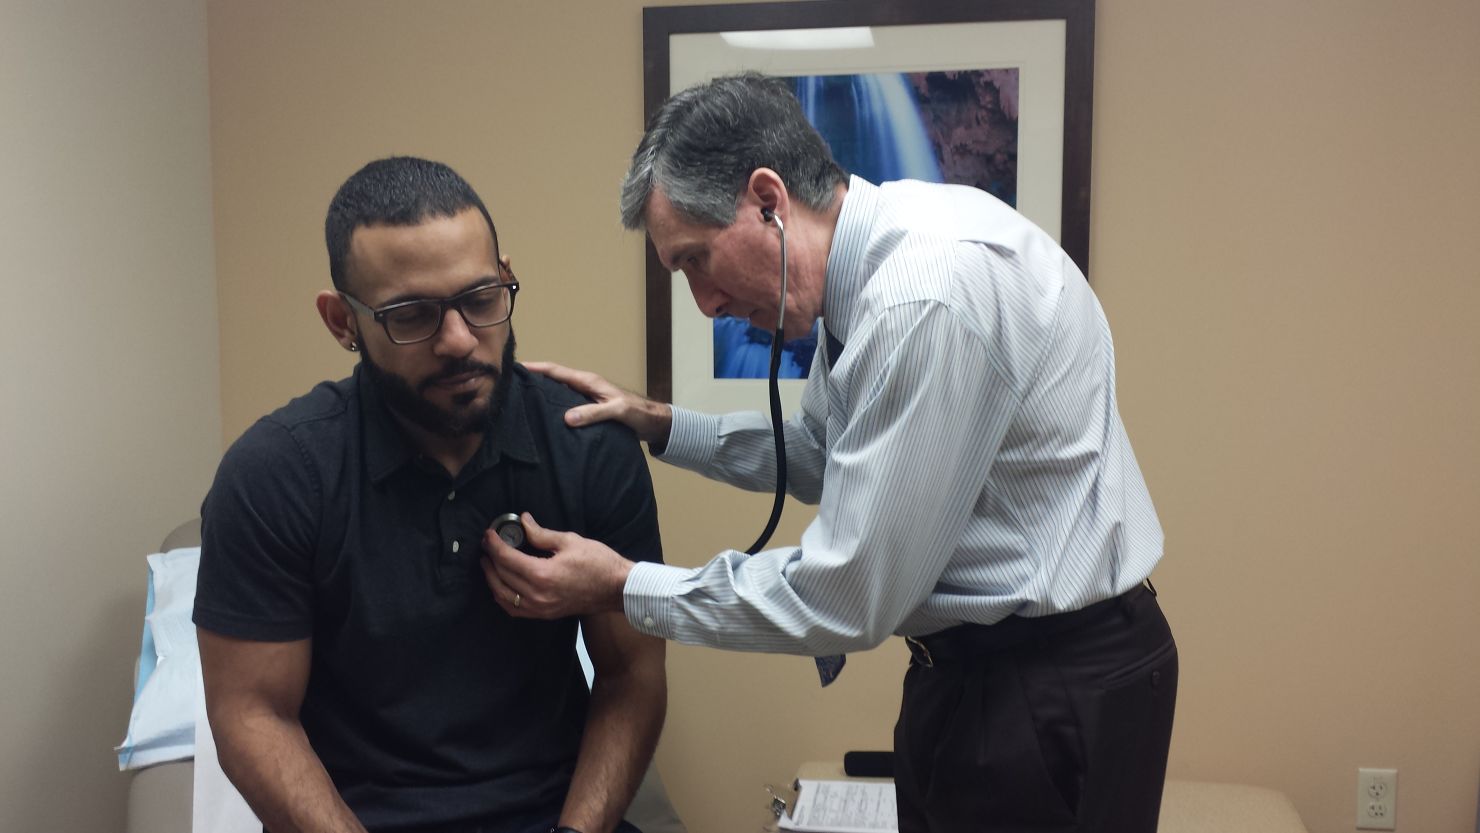 Dr. Mark Caruso examines patient Emanuel Vega during an annual physical exam at Baptist Health Primary Care in Miami.